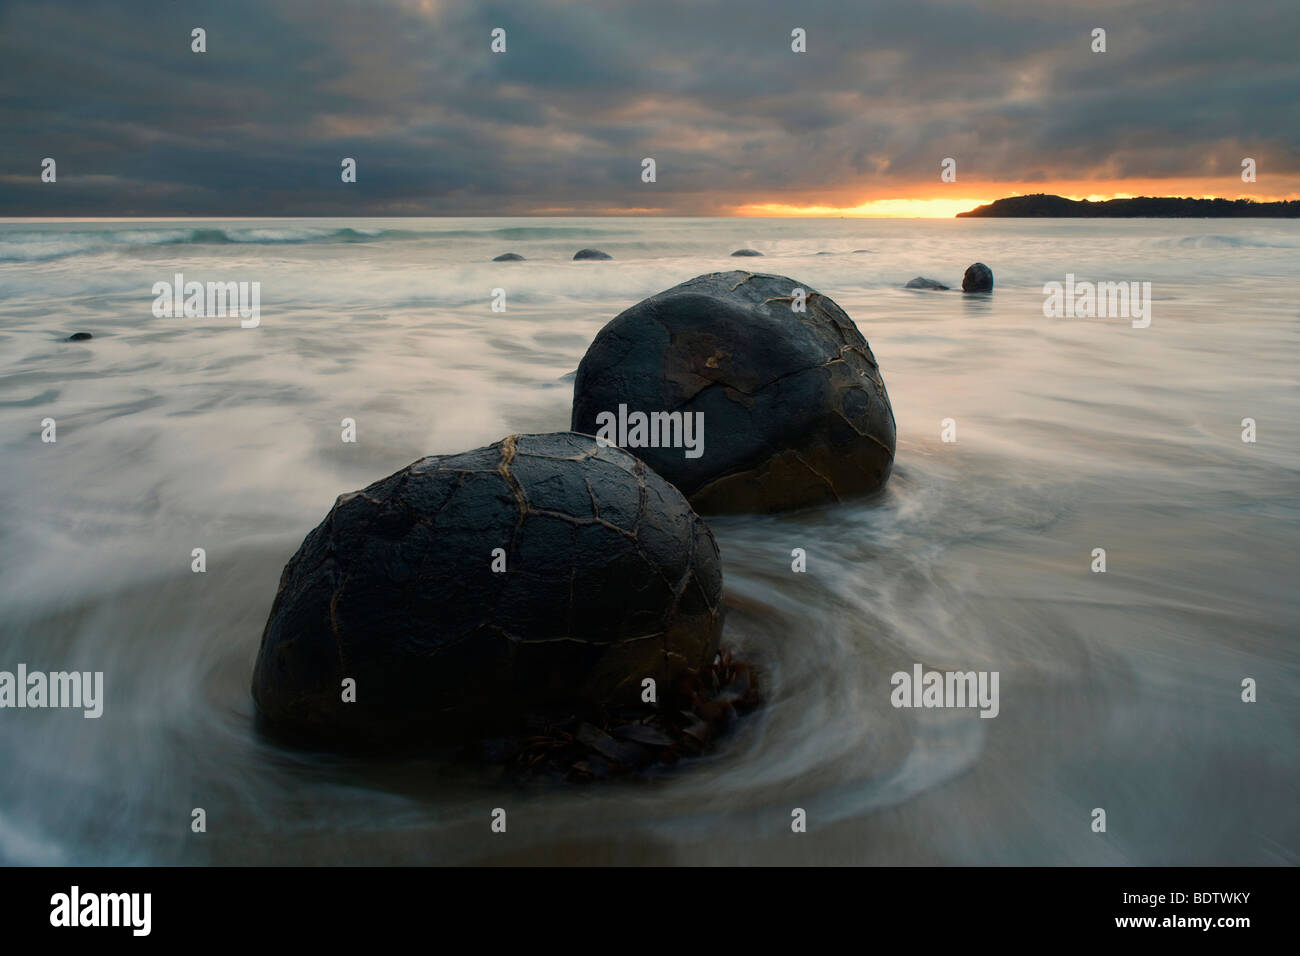 Moeraki Boulders, massive spherical rocks at dawn surrounded by water of incoming tide, Coastal Otago, South Island, New Zealand Stock Photo